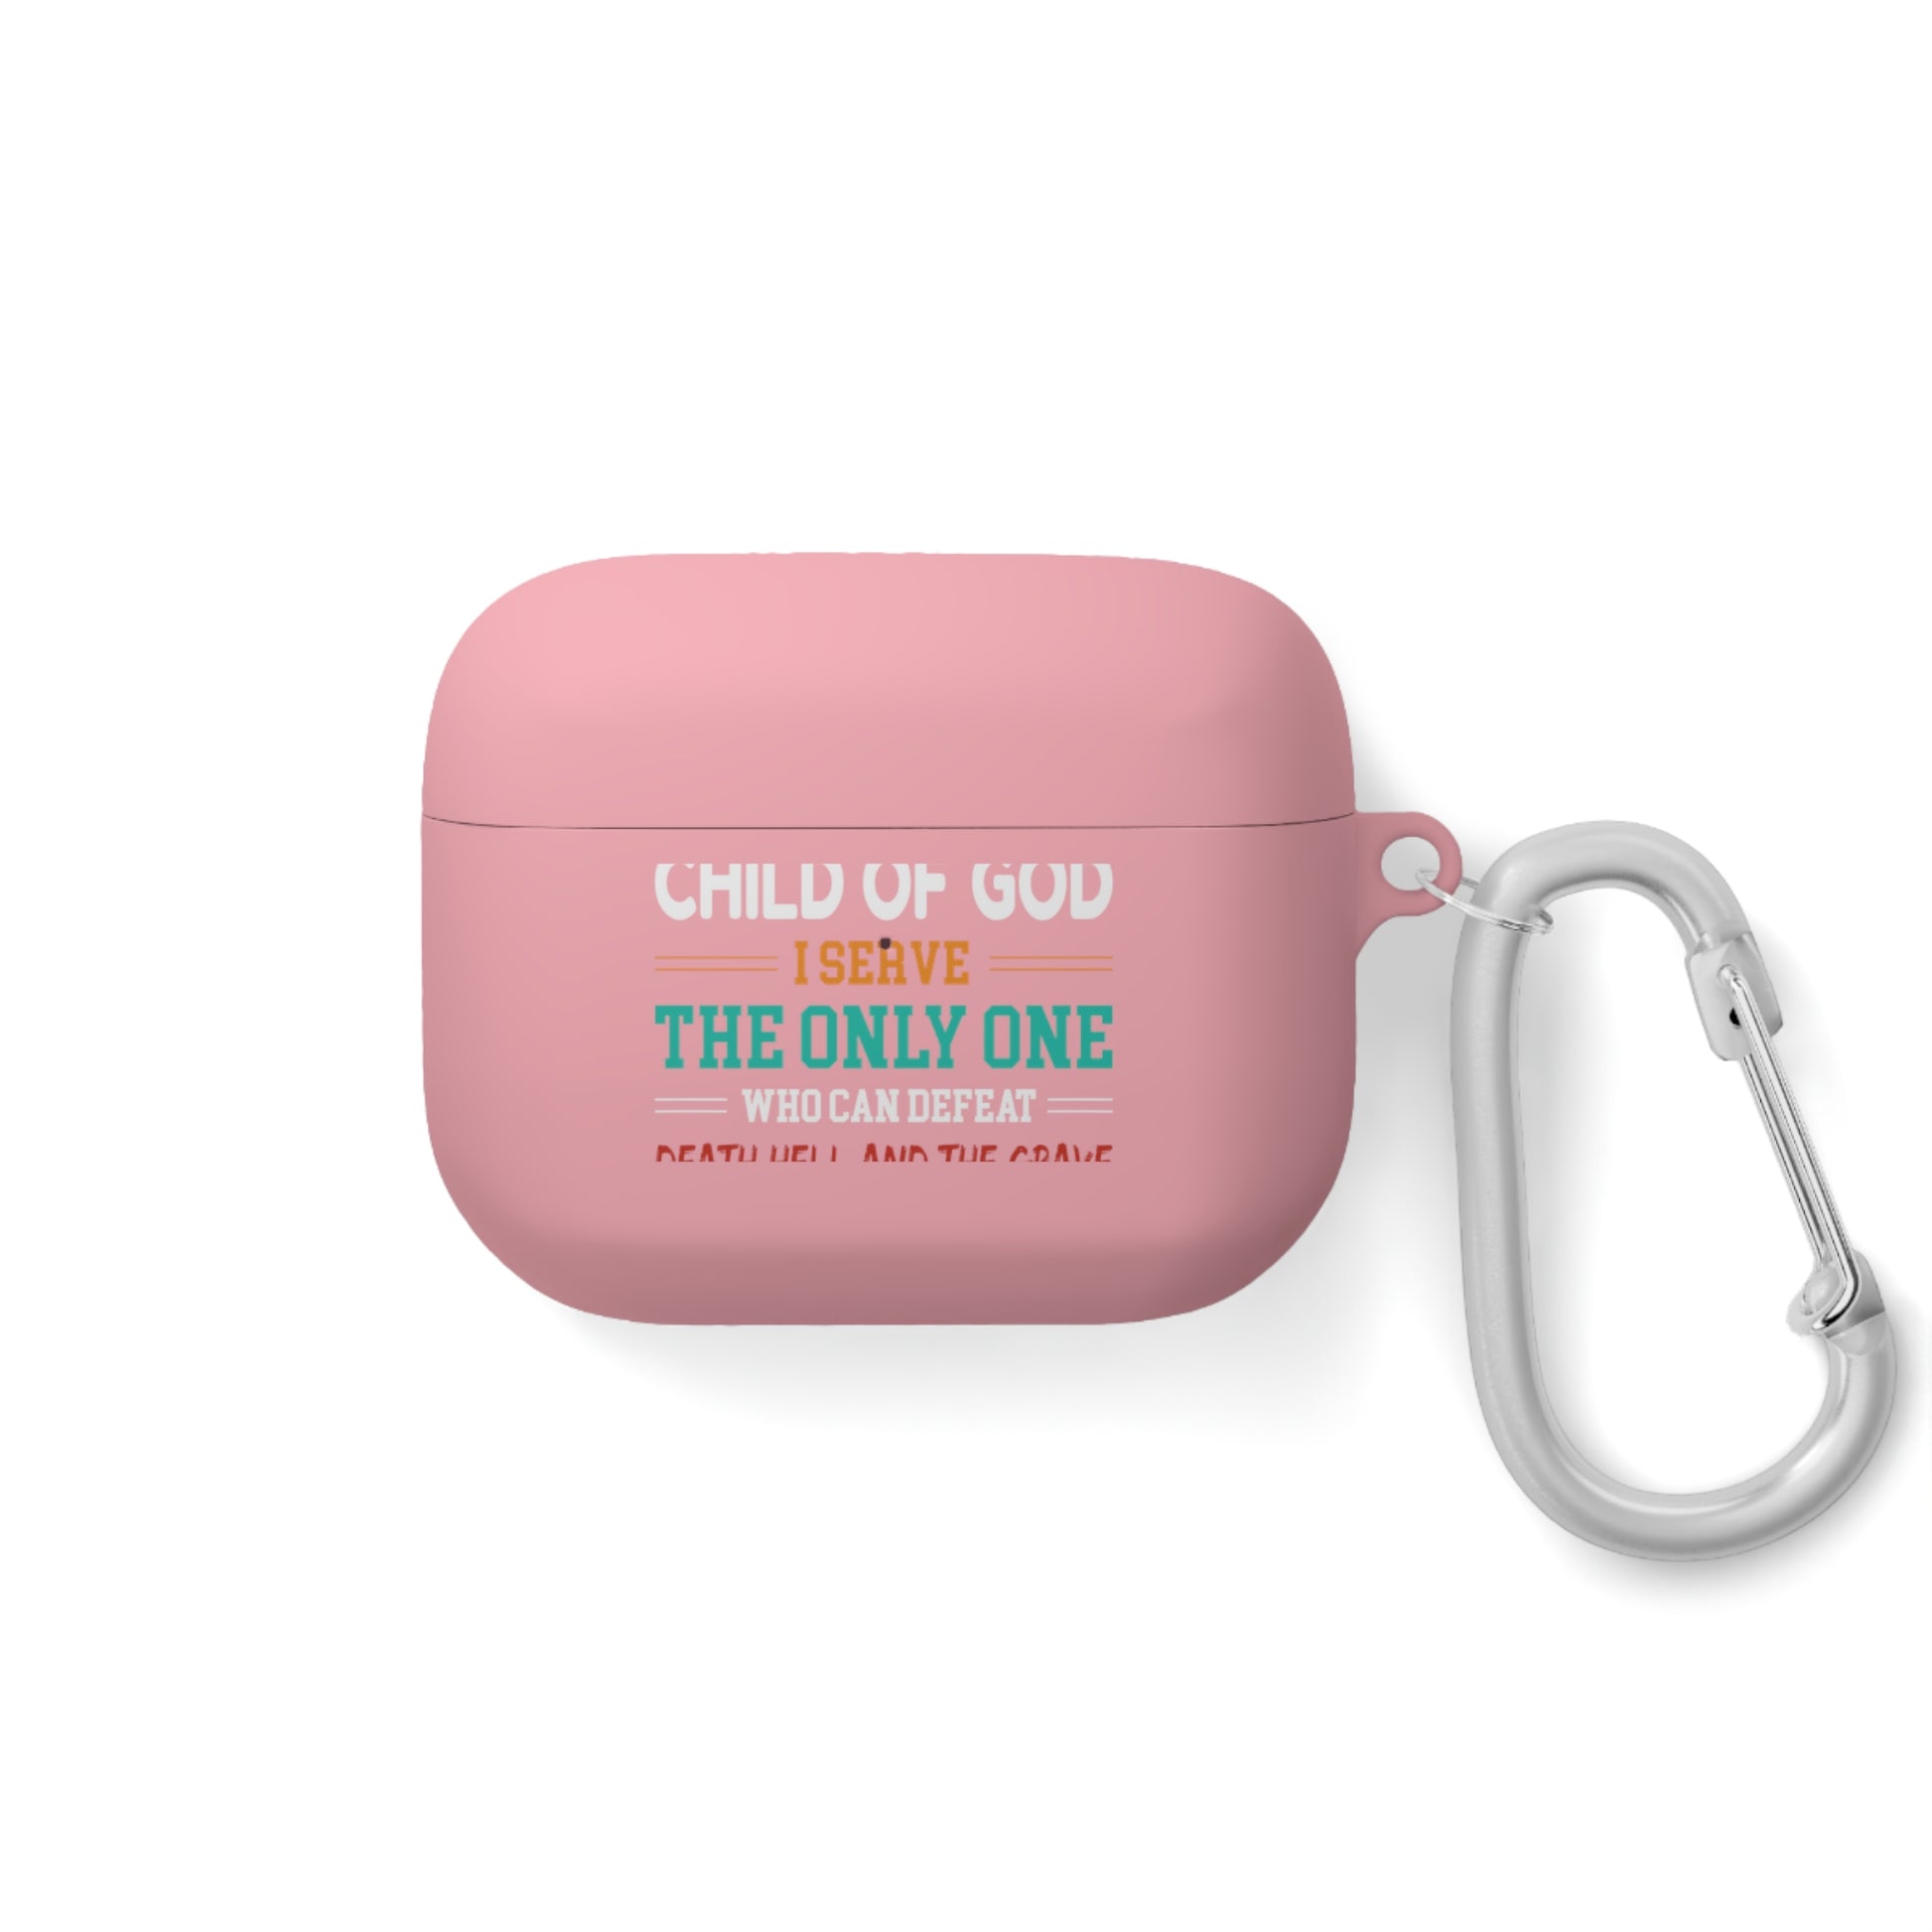 Child Of God I Serve The Only One Who Can Defeat Death Hell And The Grave Christian Airpod / Airpods Pro Case cover Printify